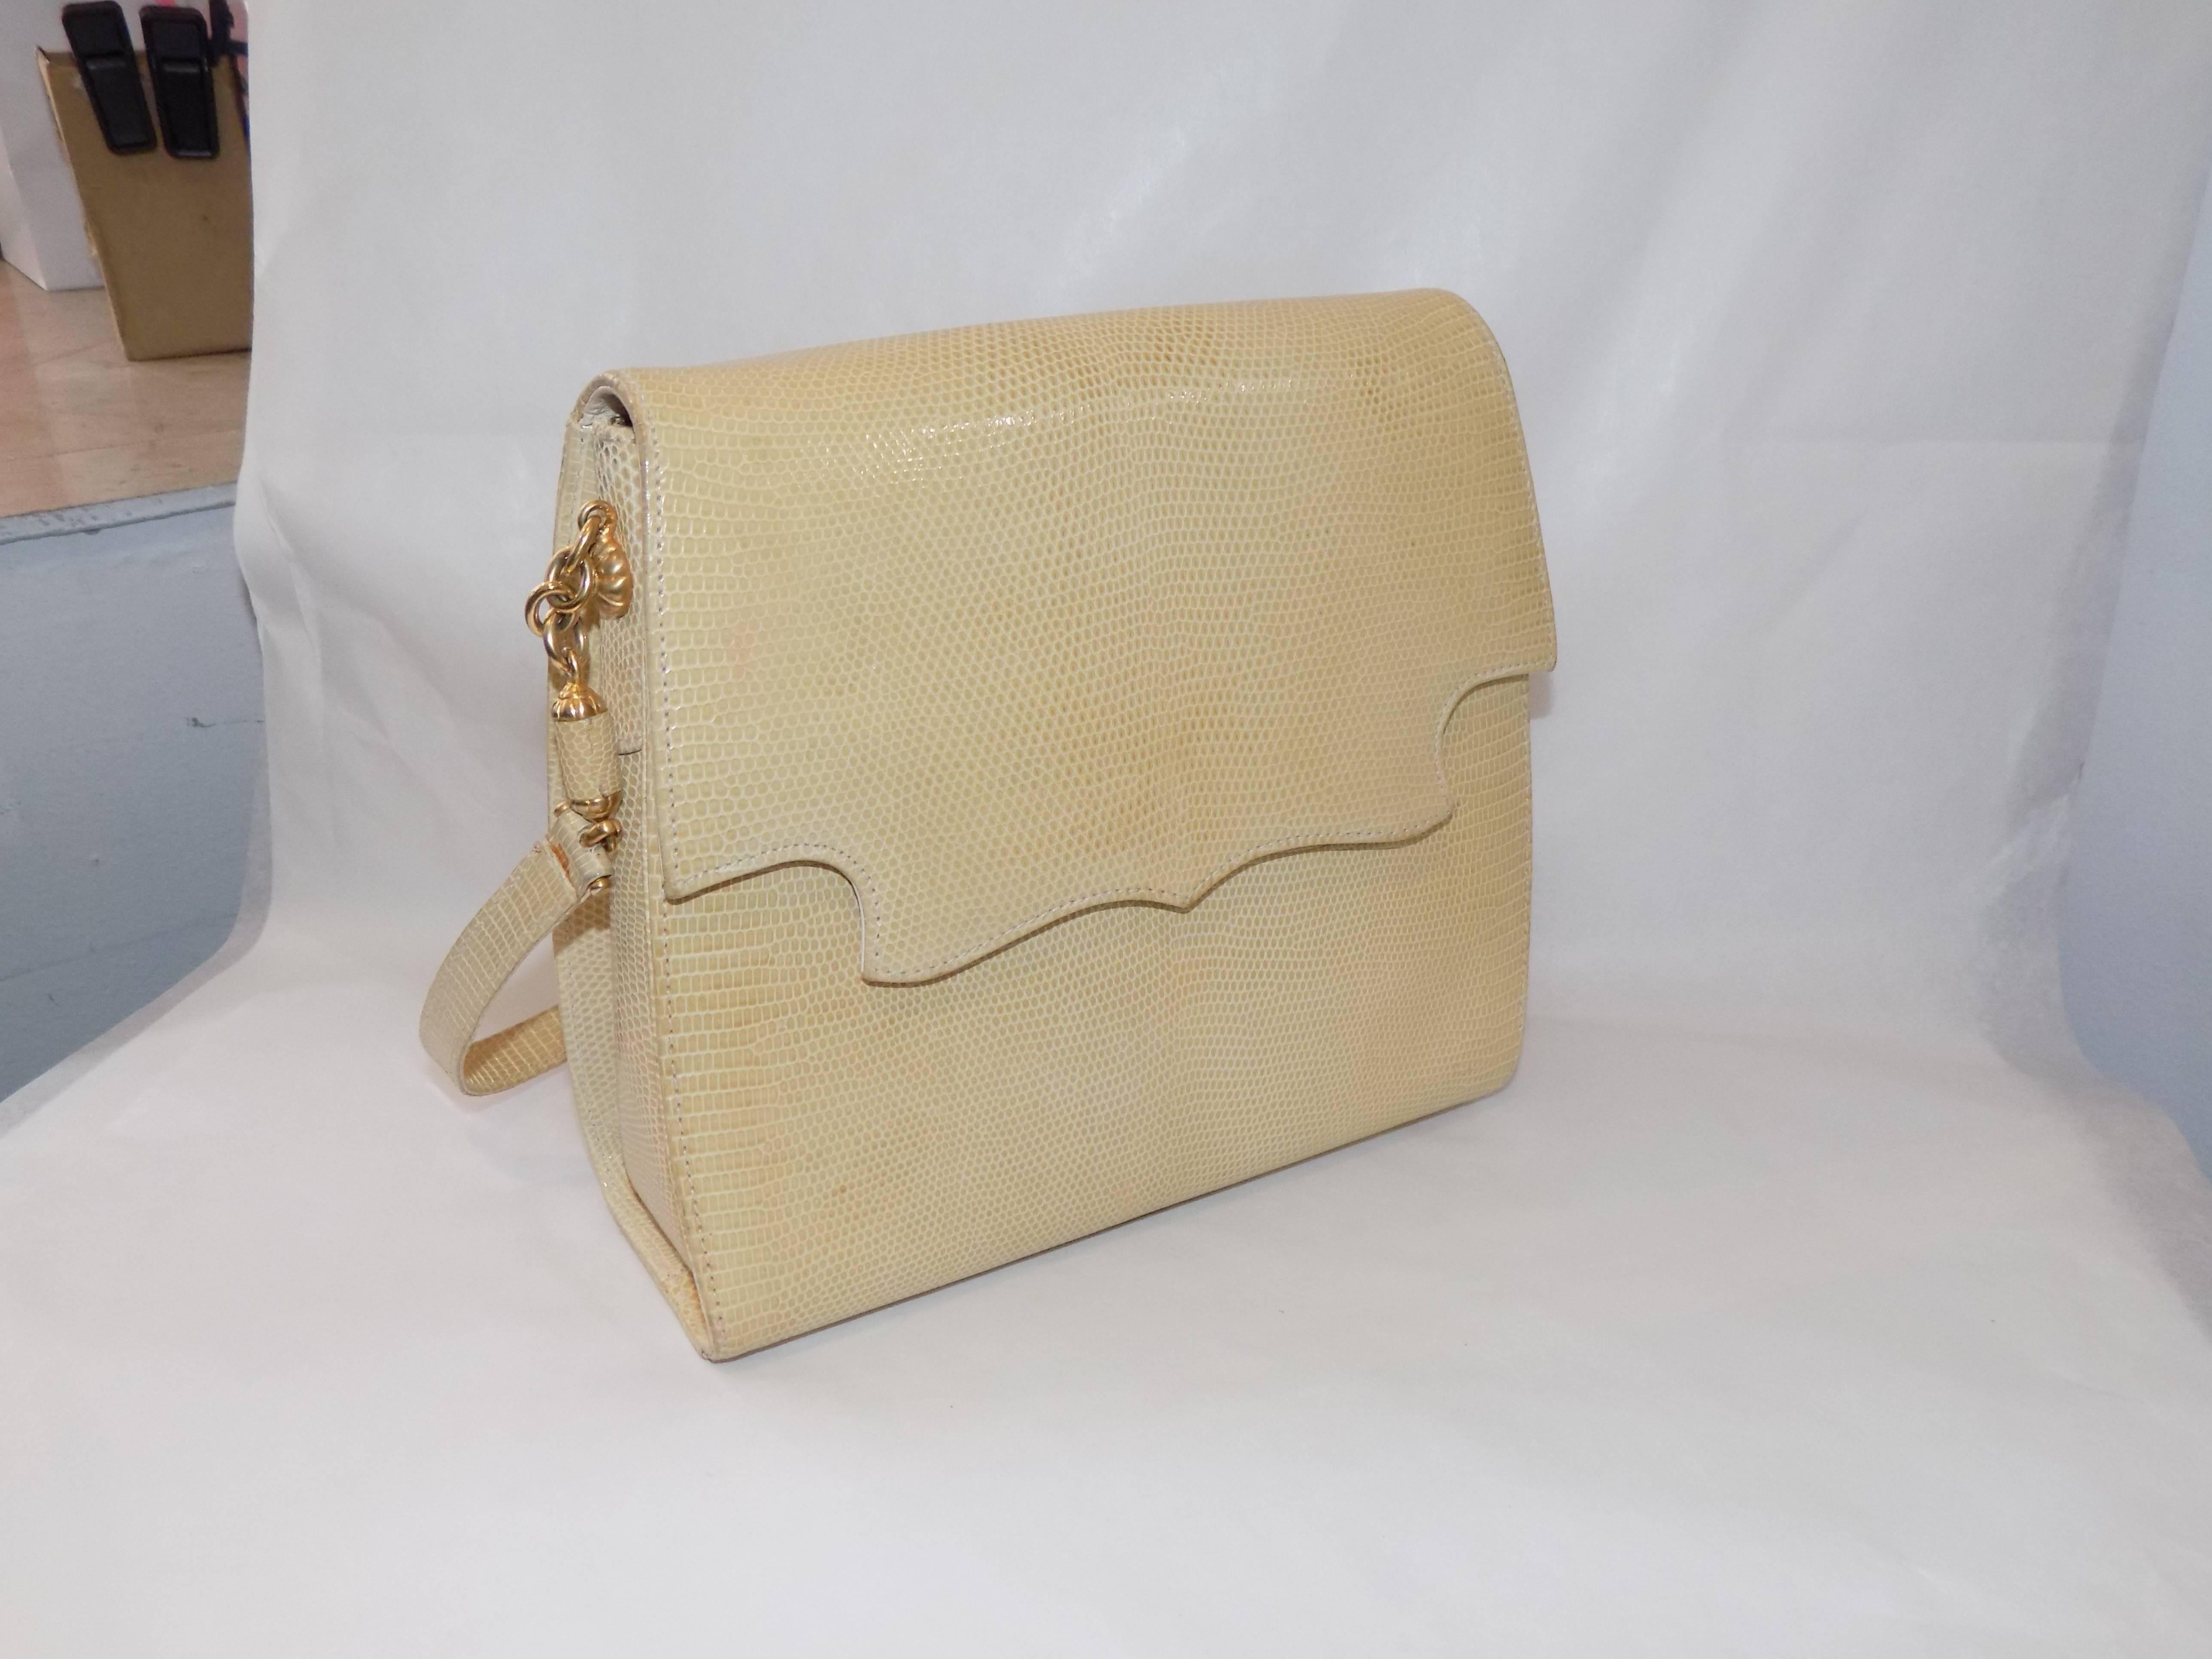 Beautiful tan lizard vintage Siso bag. Cross-body  style with gold tone hardware.
Leather lined. Flap magnetic snap closure.  Excellent condition
Measures 9